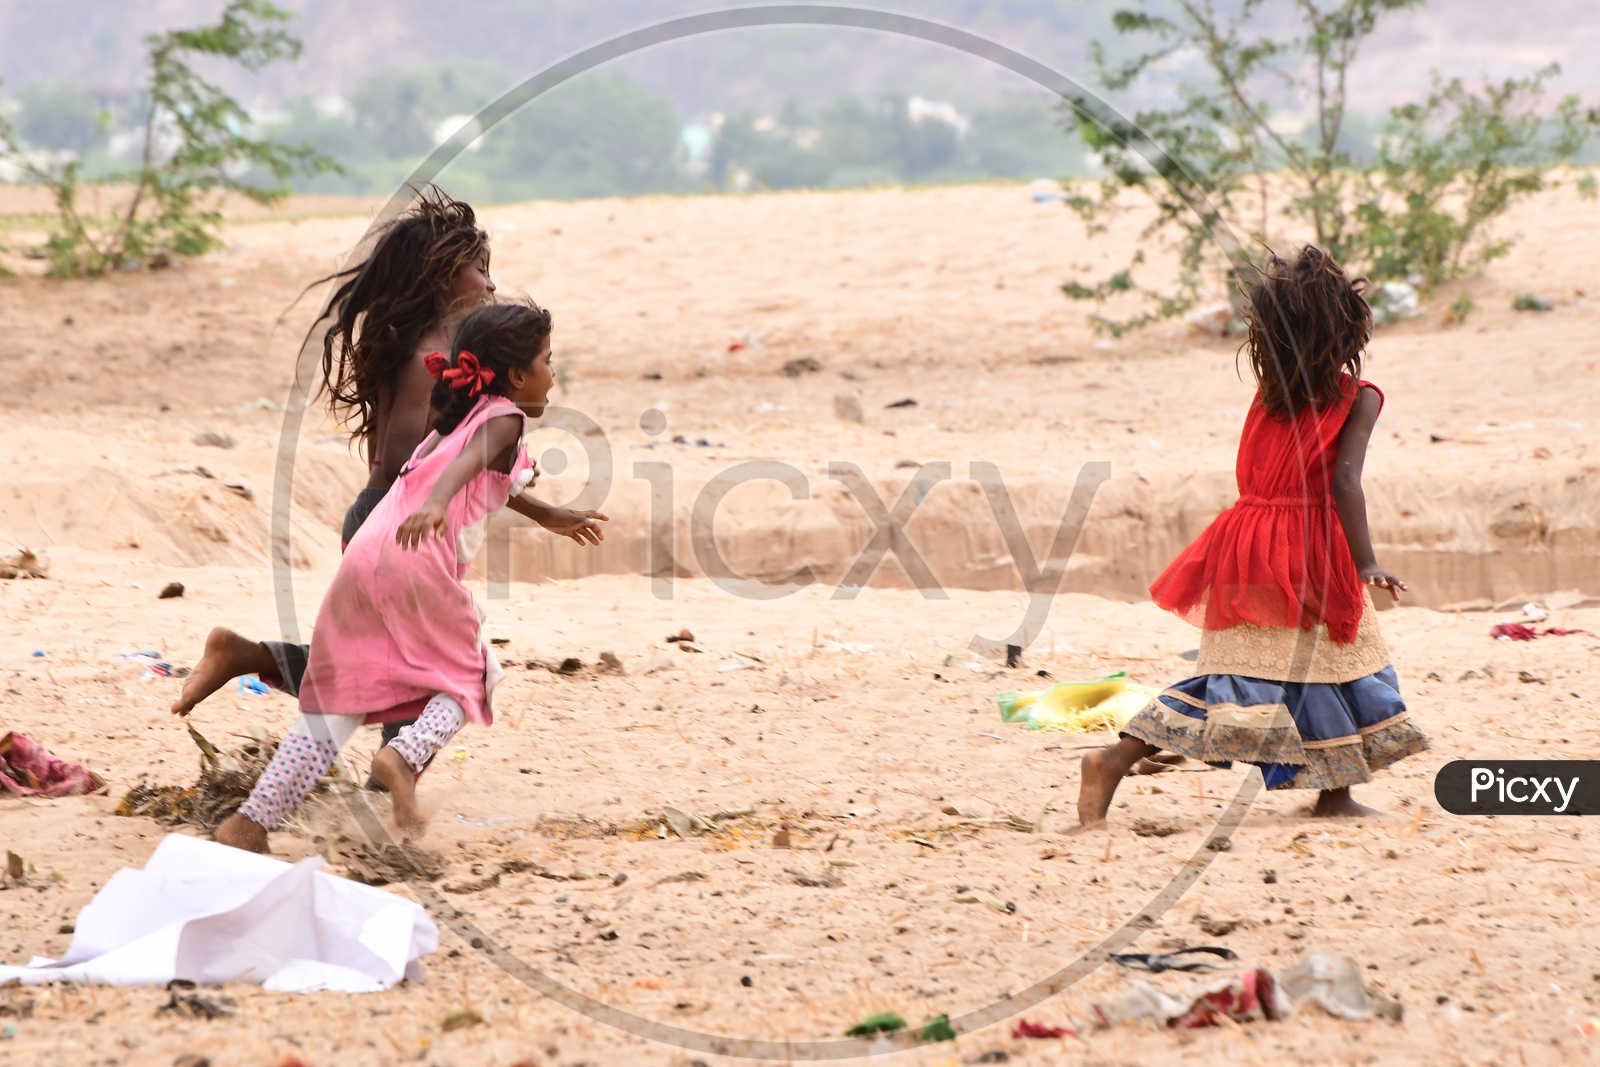 Indian Rural kids playing in the sand